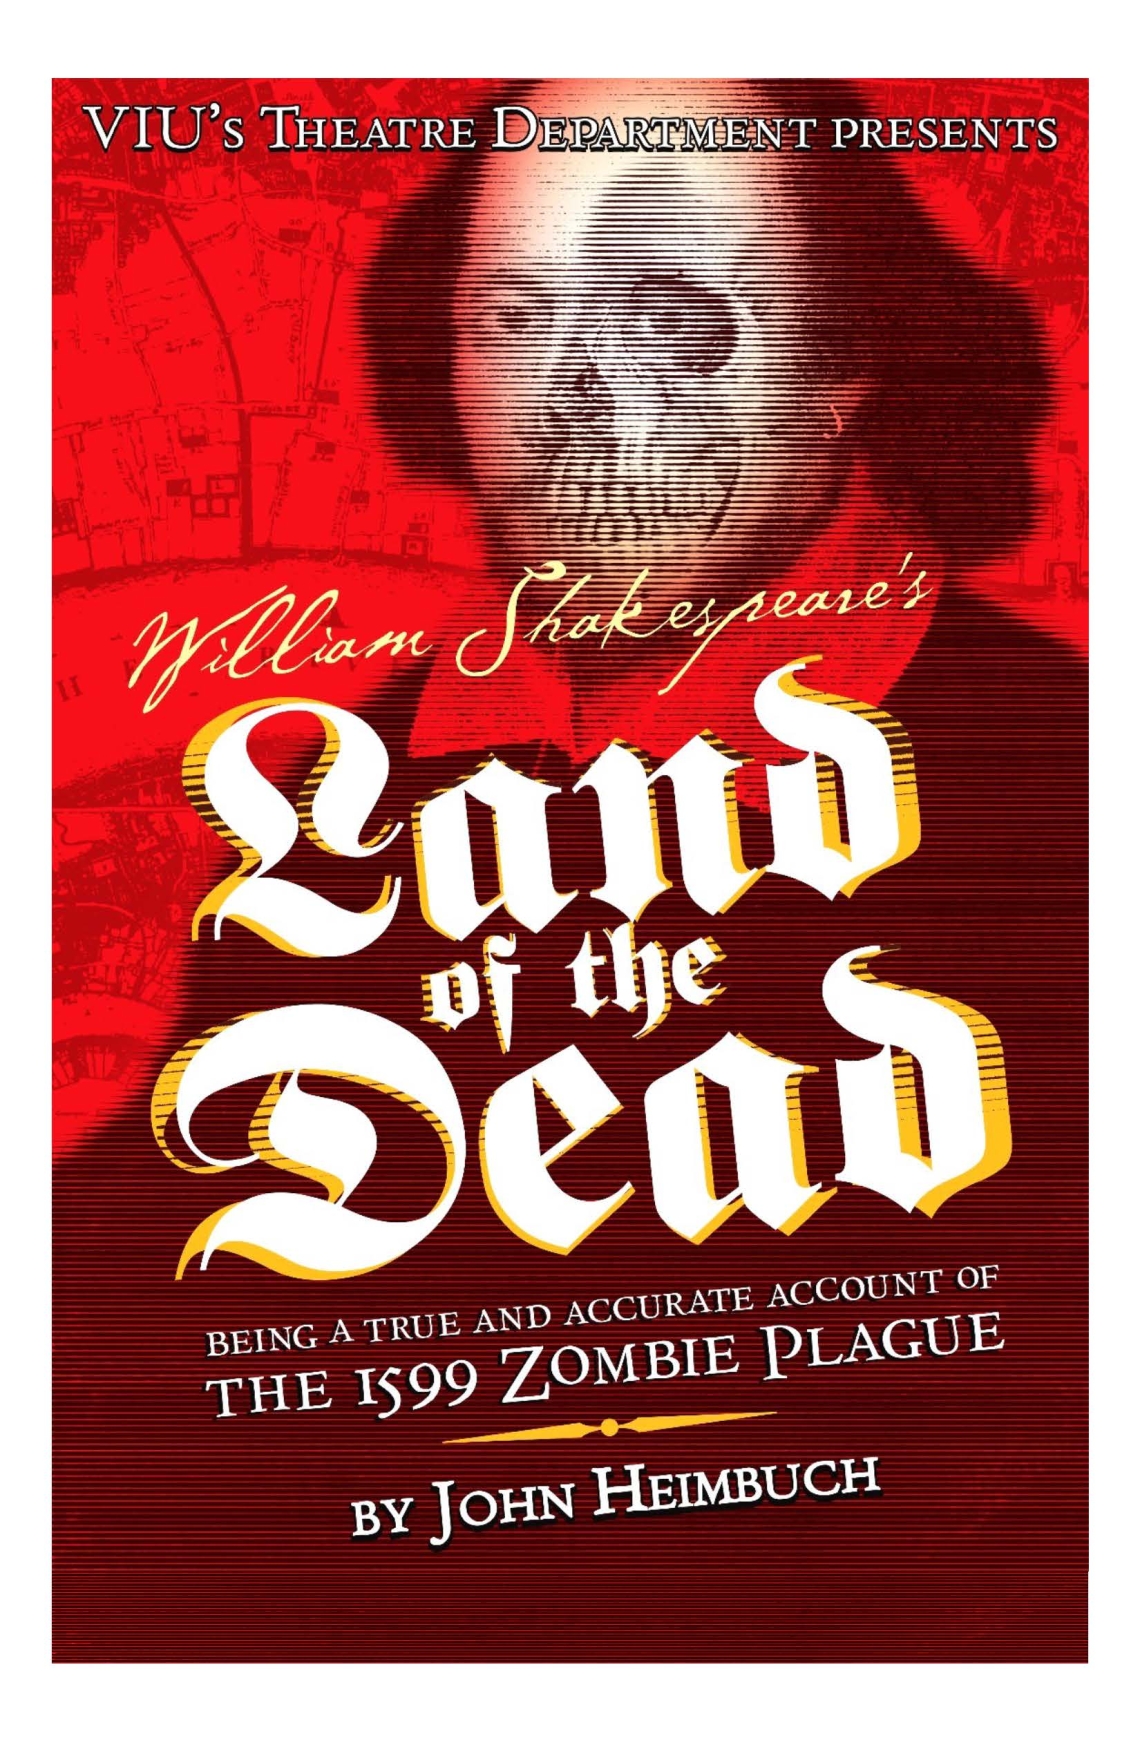 Malaspina Theatre Presents: William Shakespeares Land of the Dead